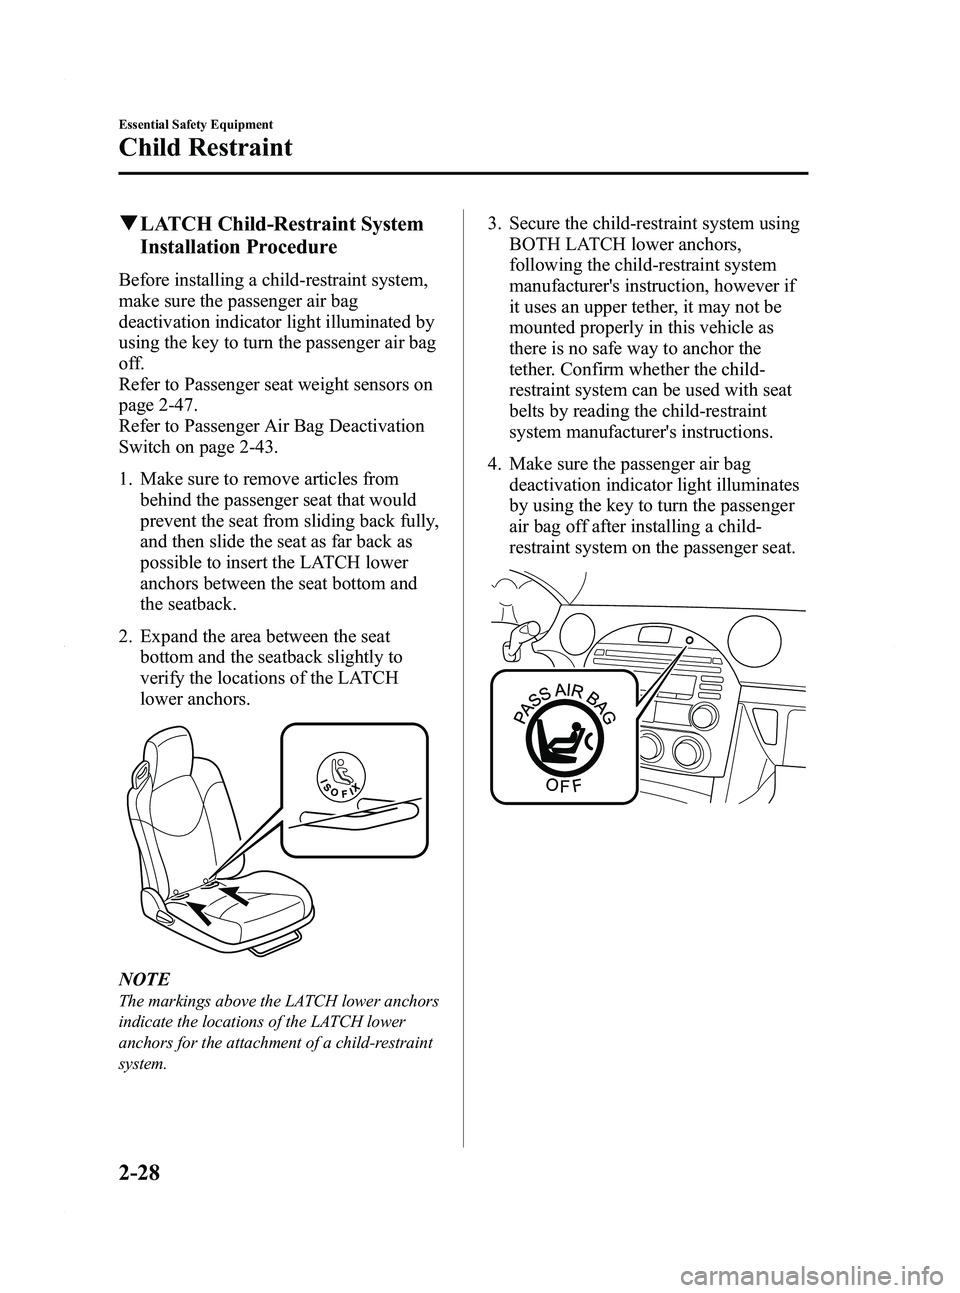 MAZDA MODEL MX-5 MIATA 2011  Owners Manual Black plate (40,1)
qLATCH Child-Restraint System
Installation Procedure
Before installing a child-restraint system,
make sure the passenger air bag
deactivation indicator light illuminated by
using th